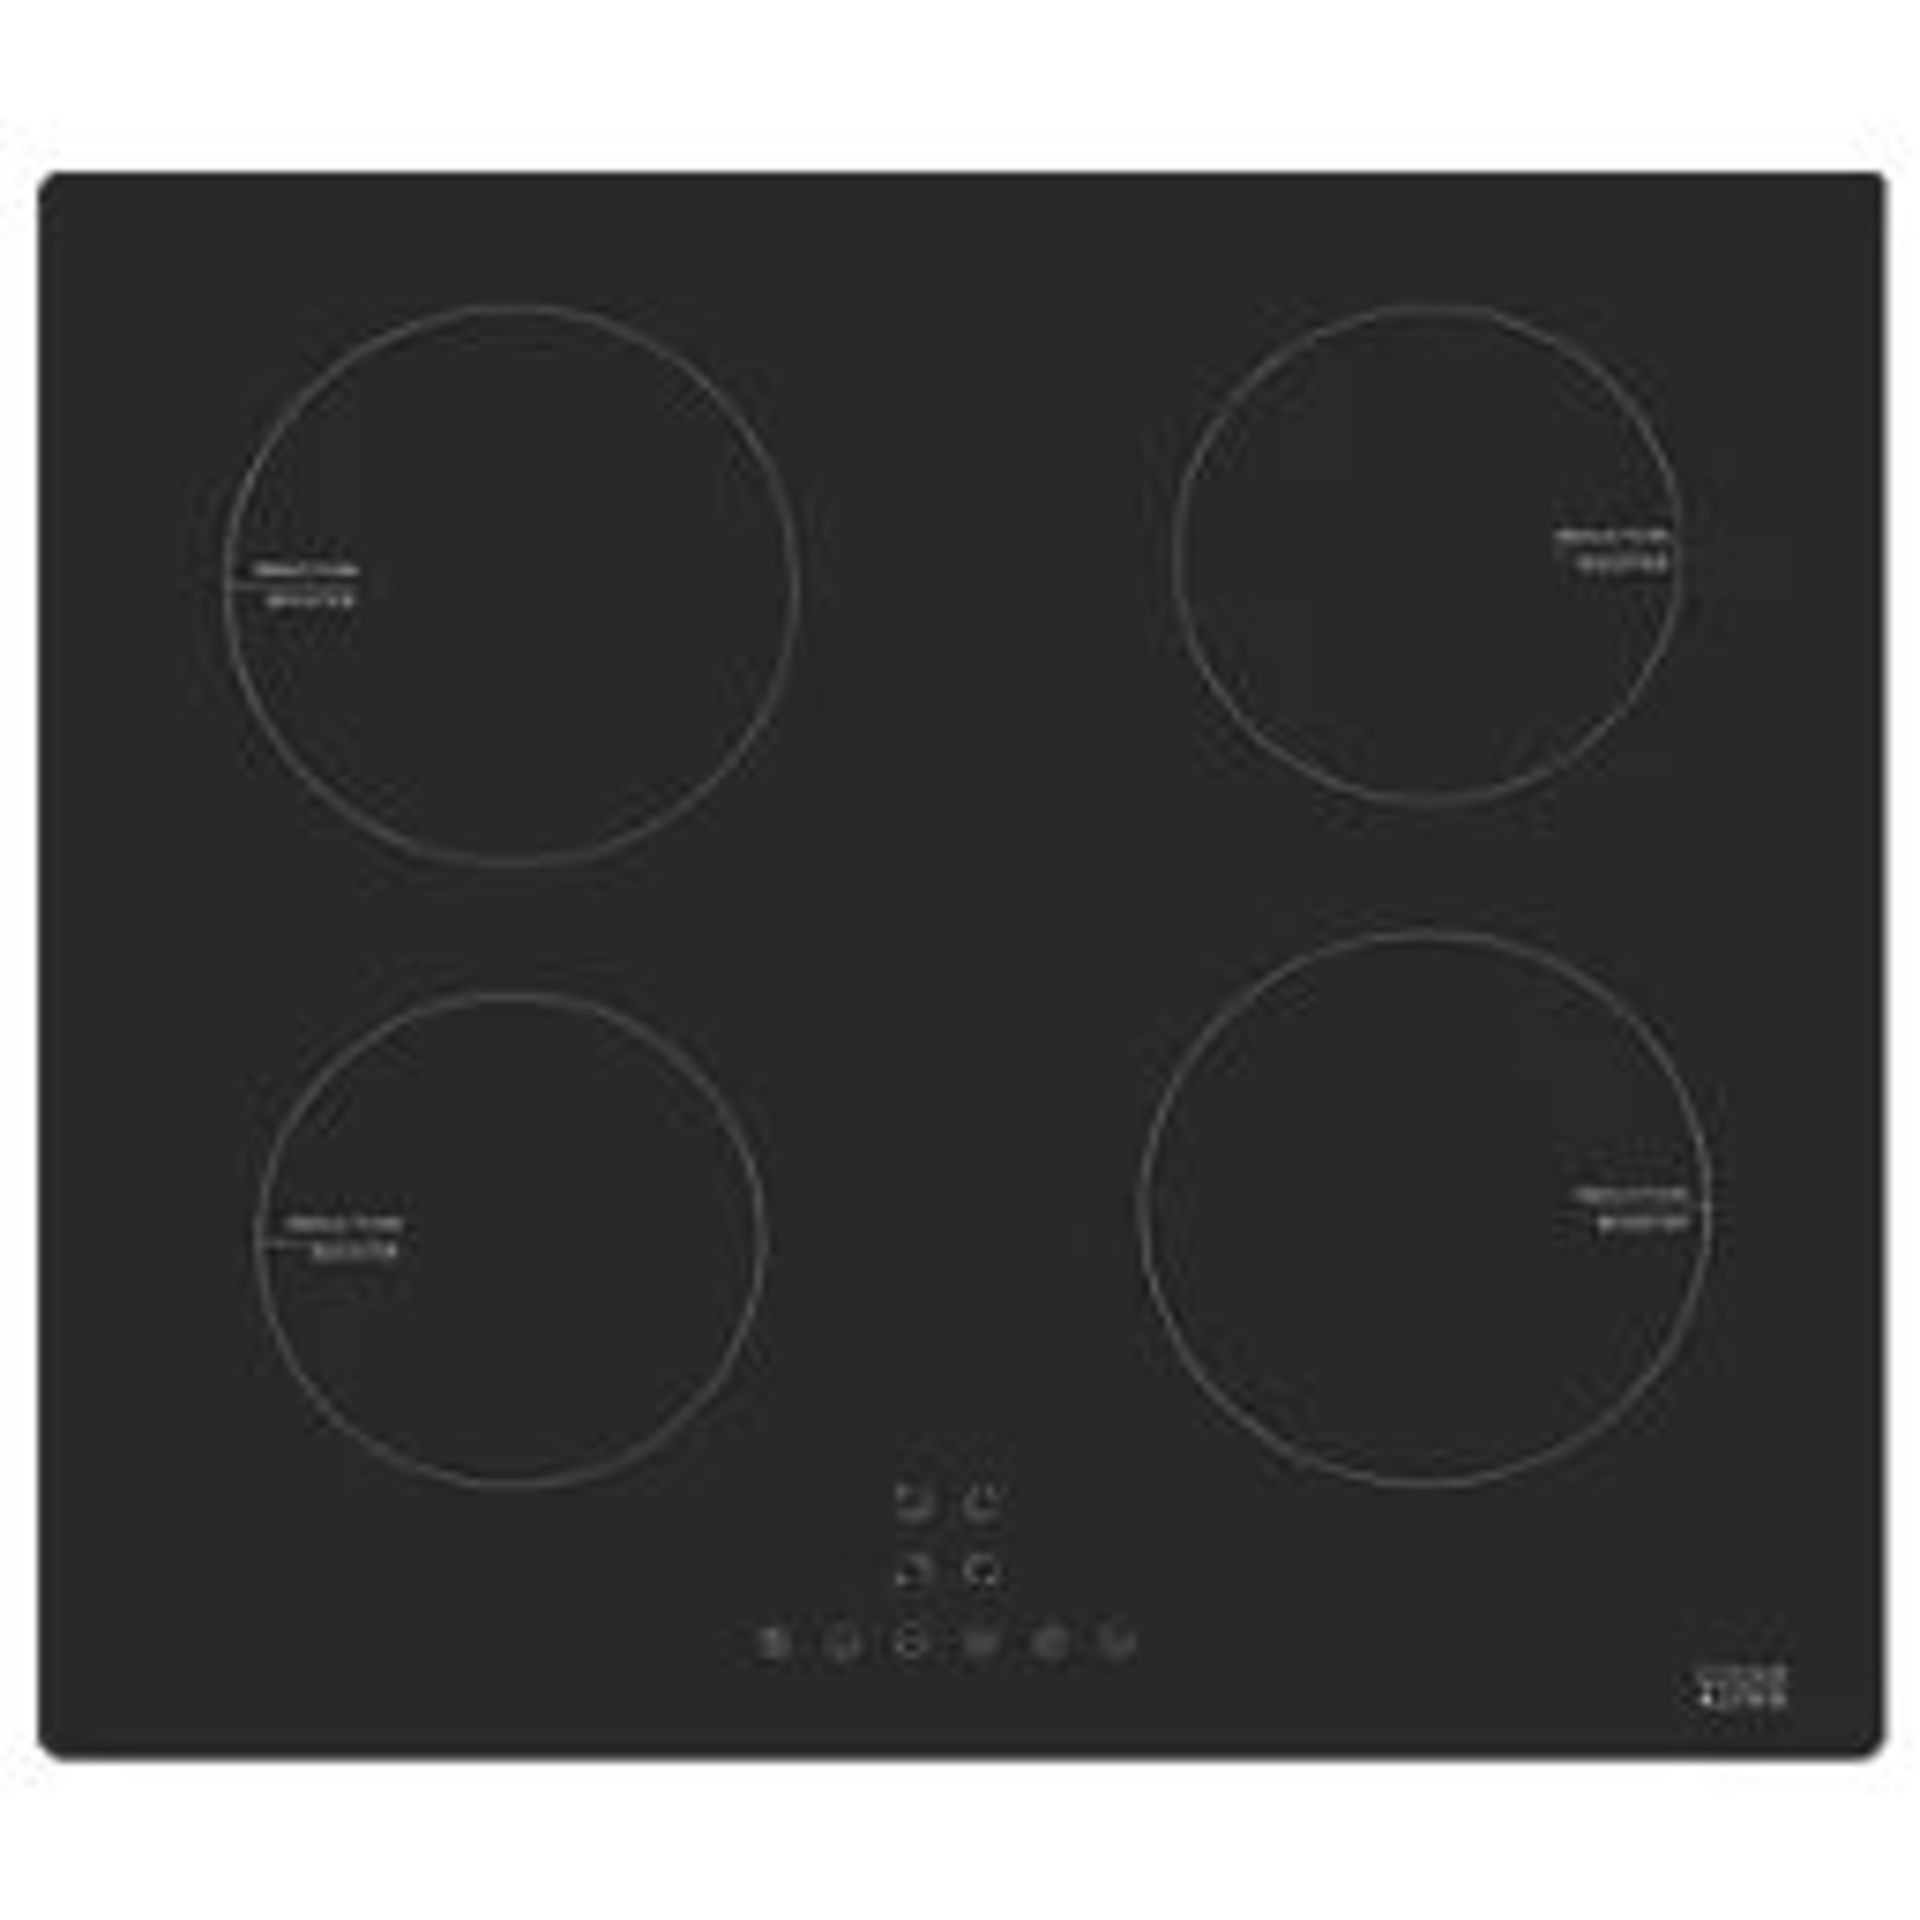 COOKE & LEWIS INDUCTION HOB BLACK 59CM. - R9BW. Induction hob heats the surface of the pan, not